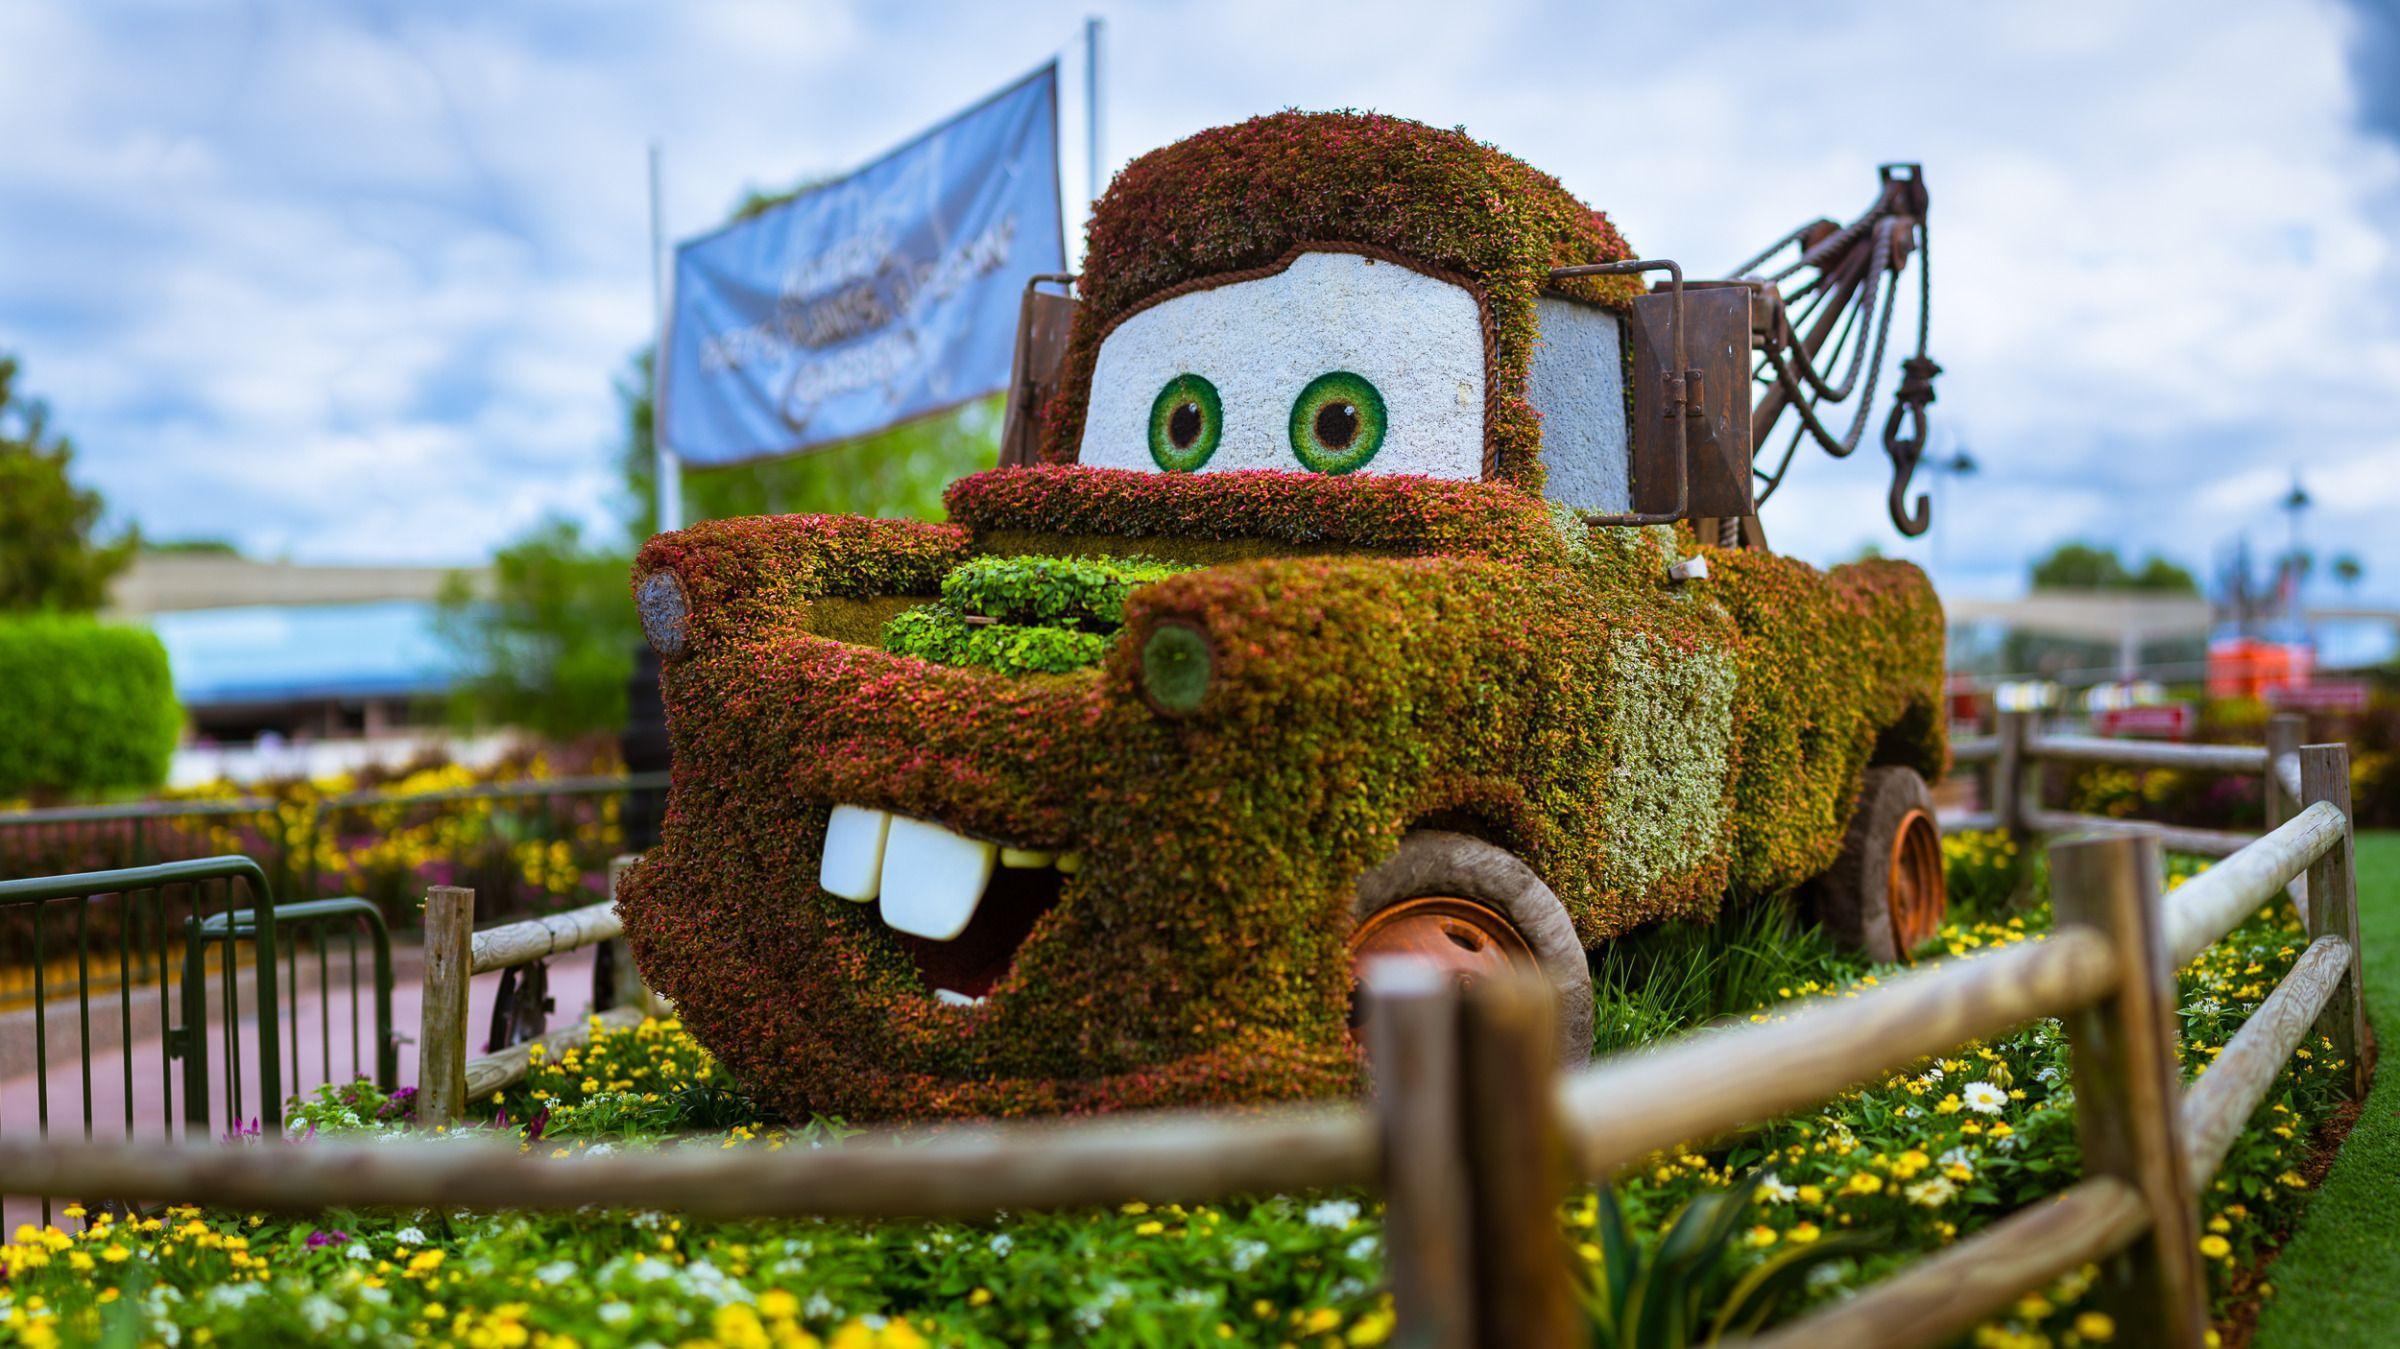 Sir Tow Mater Topiary at Disney World, Cars Movie widescreen